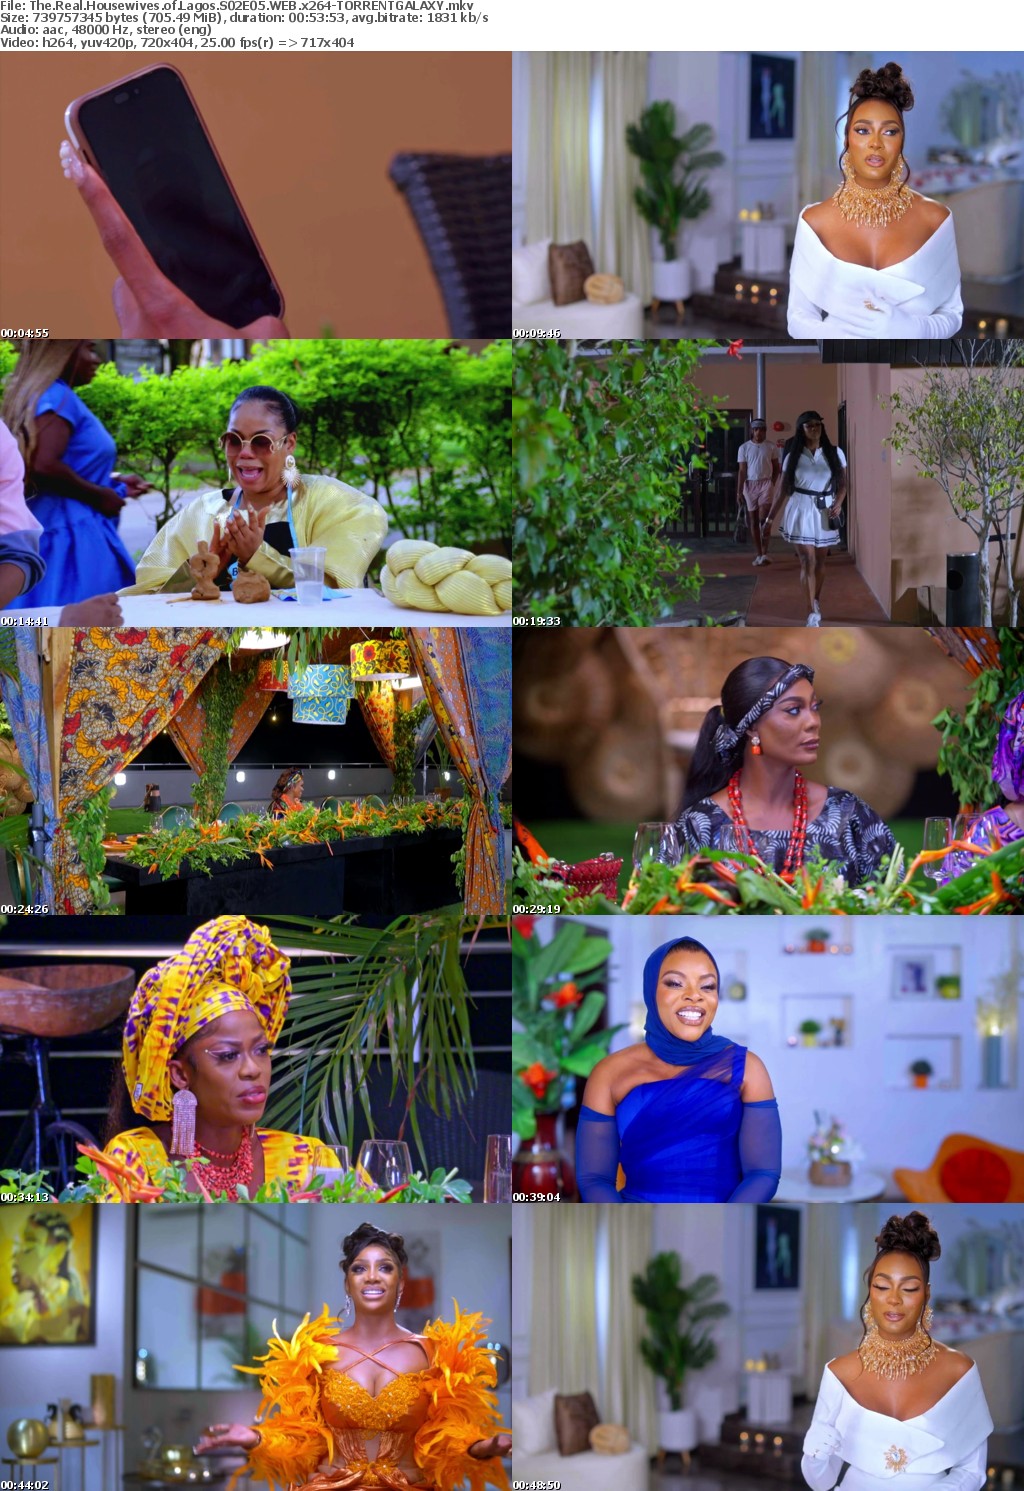 The Real Housewives of Lagos S02E05 WEB x264-GALAXY